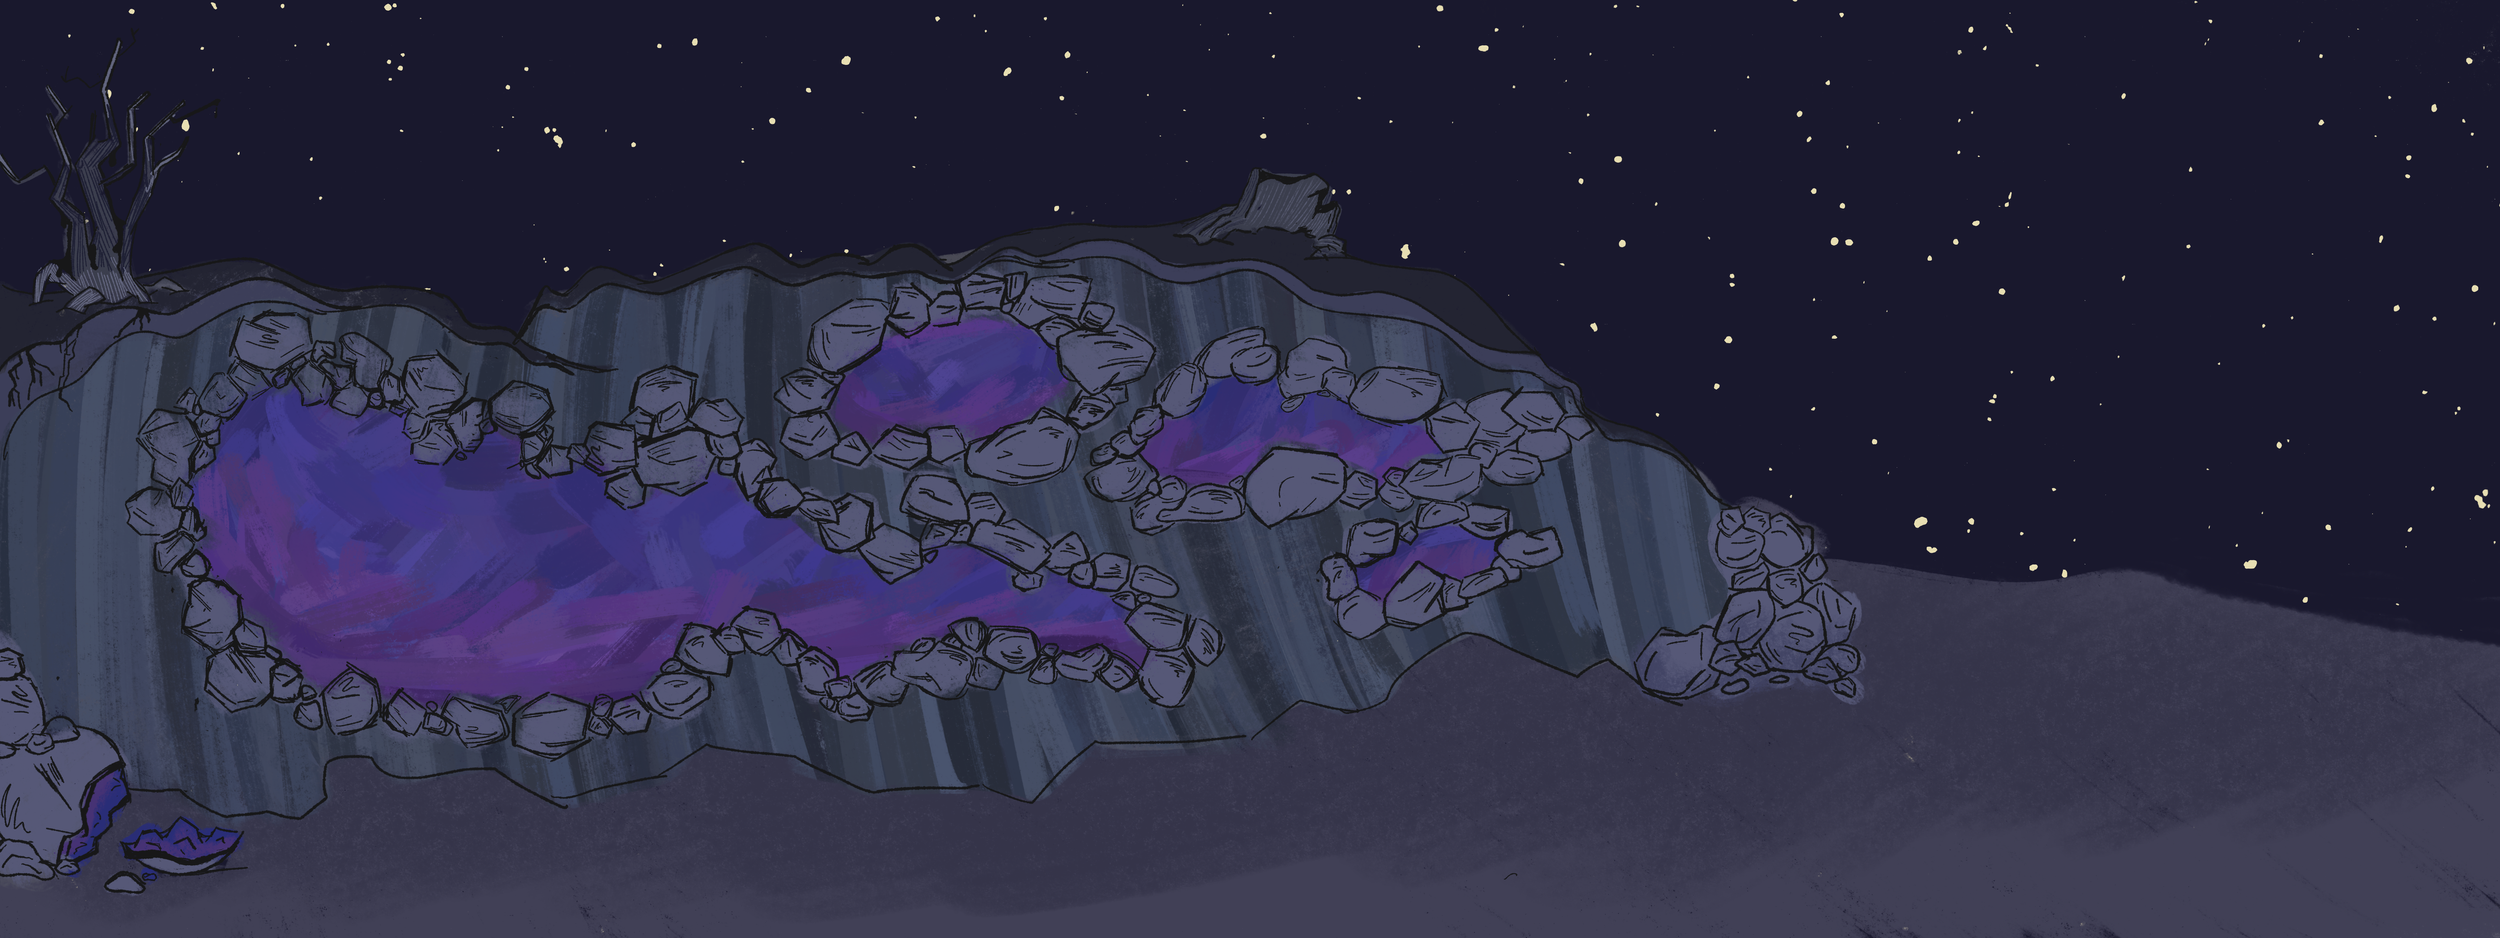 geode.png